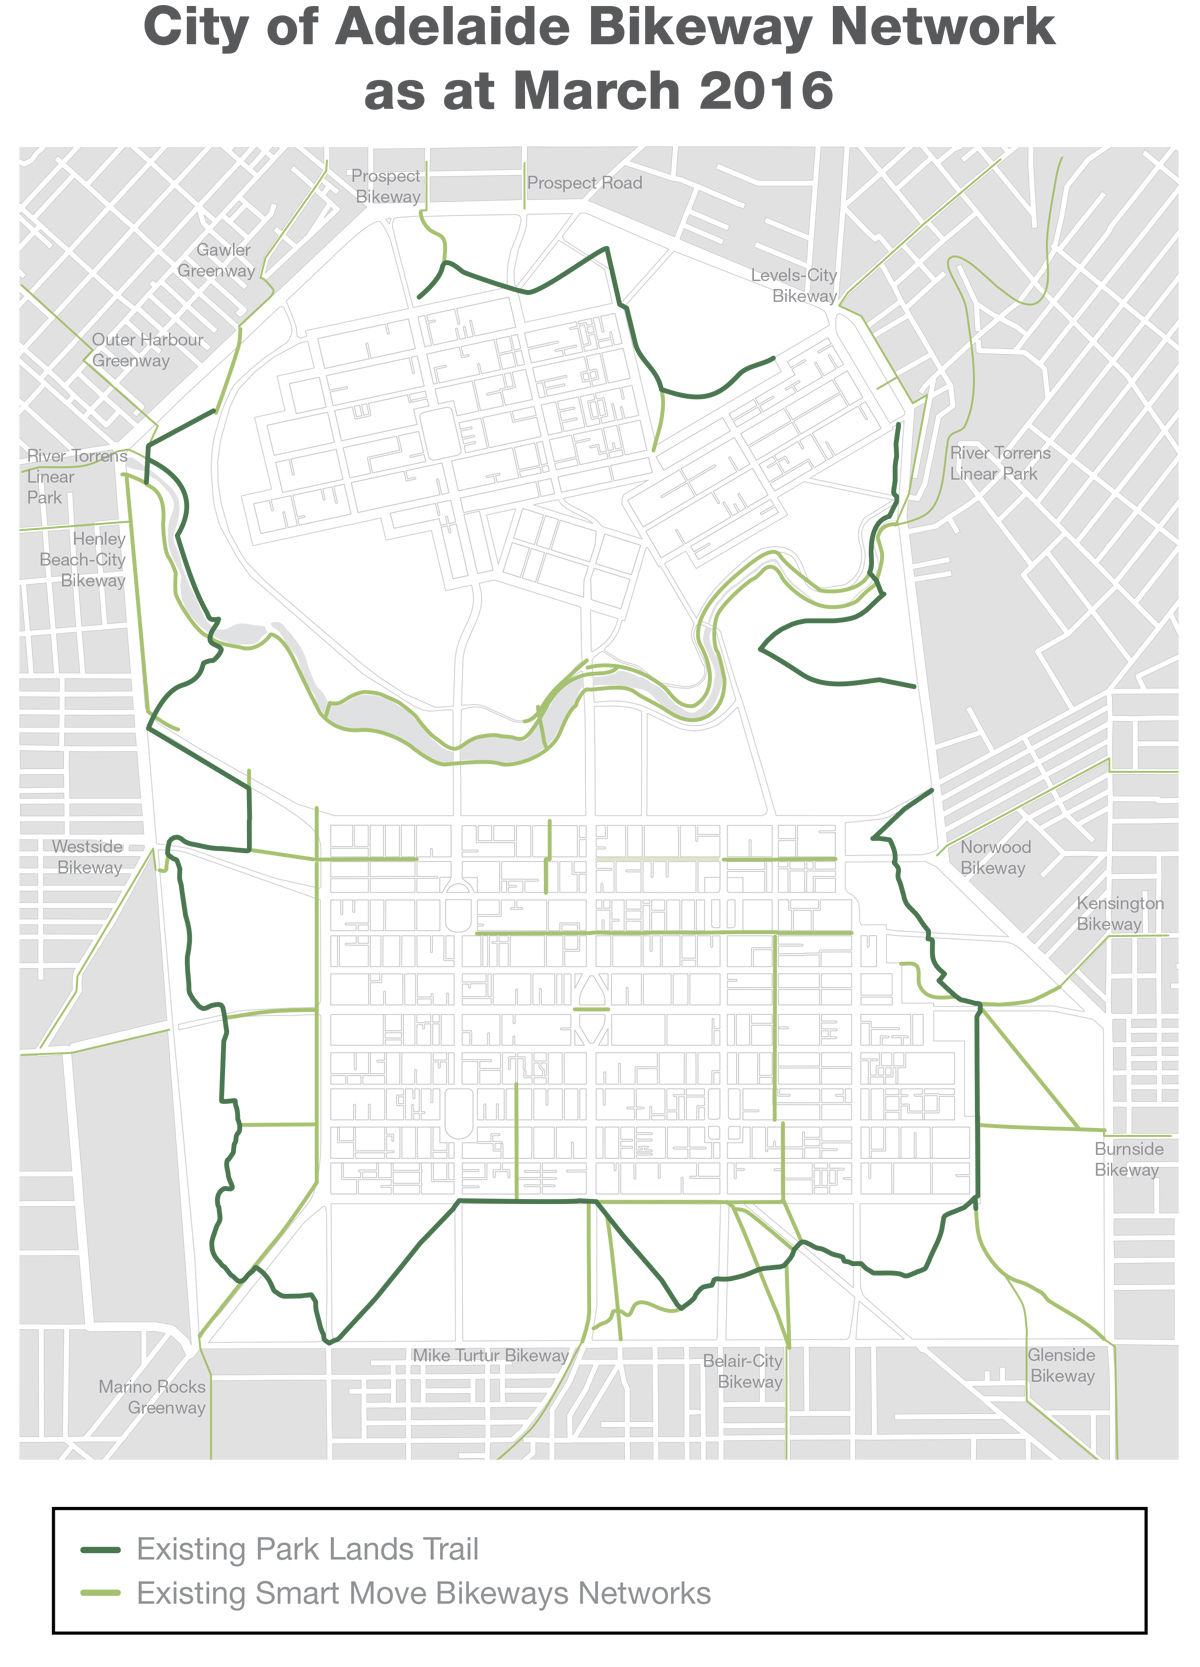 The existing network of bike lanes in the CBD.